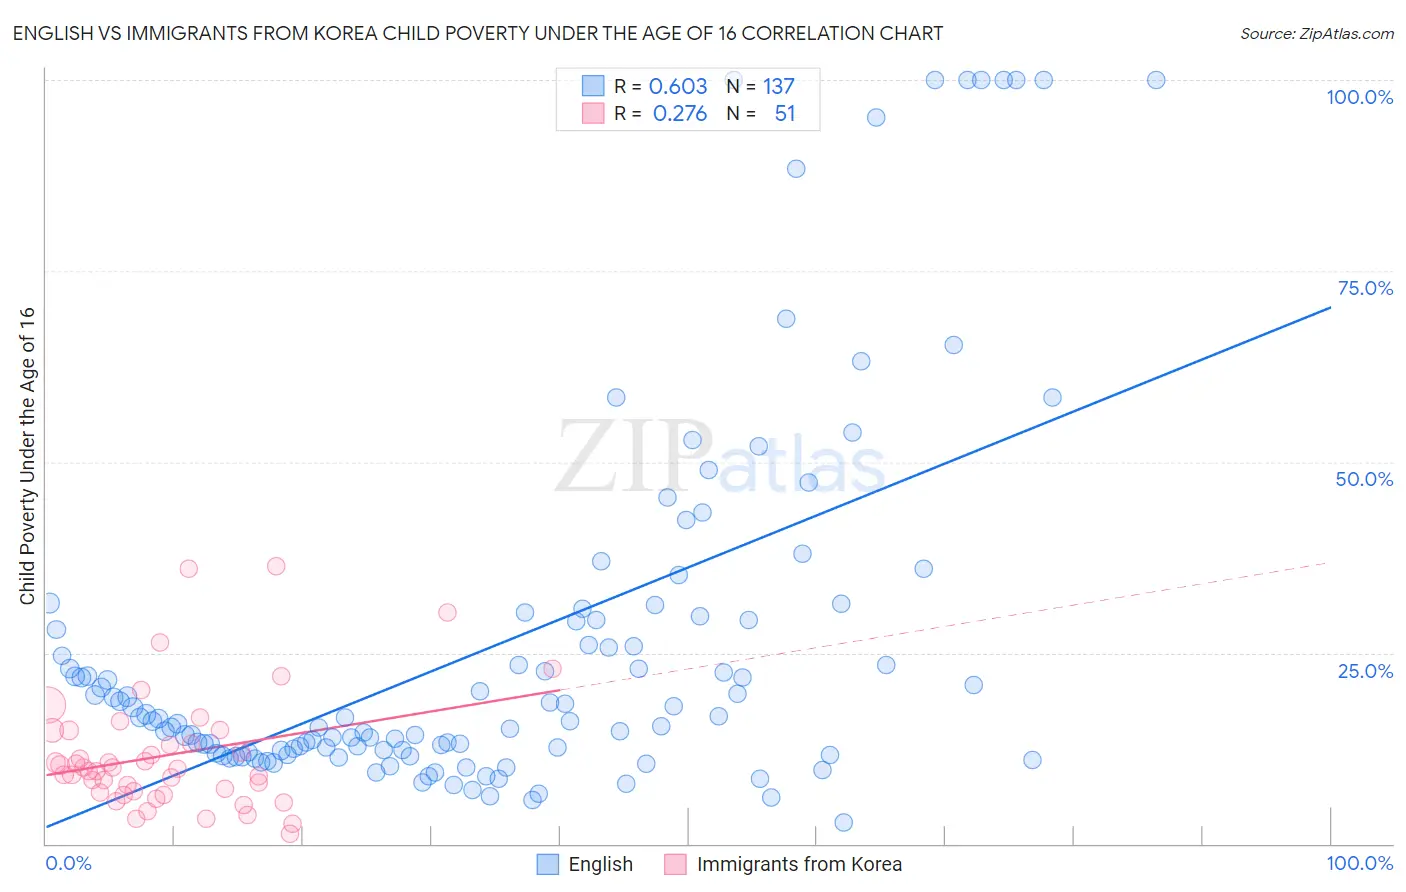 English vs Immigrants from Korea Child Poverty Under the Age of 16